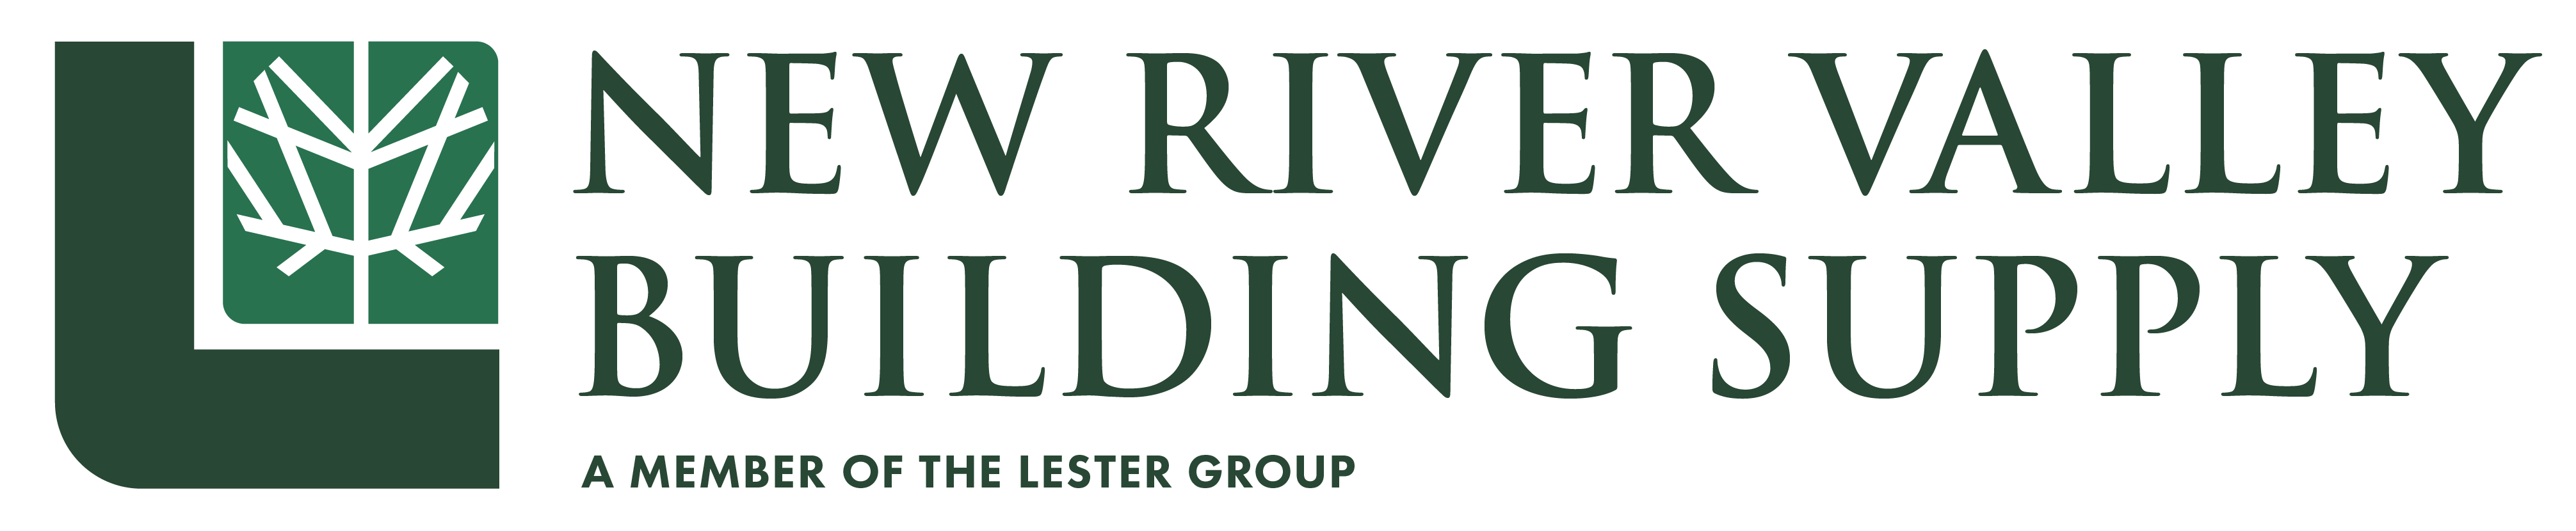 New River Valley Building Supply